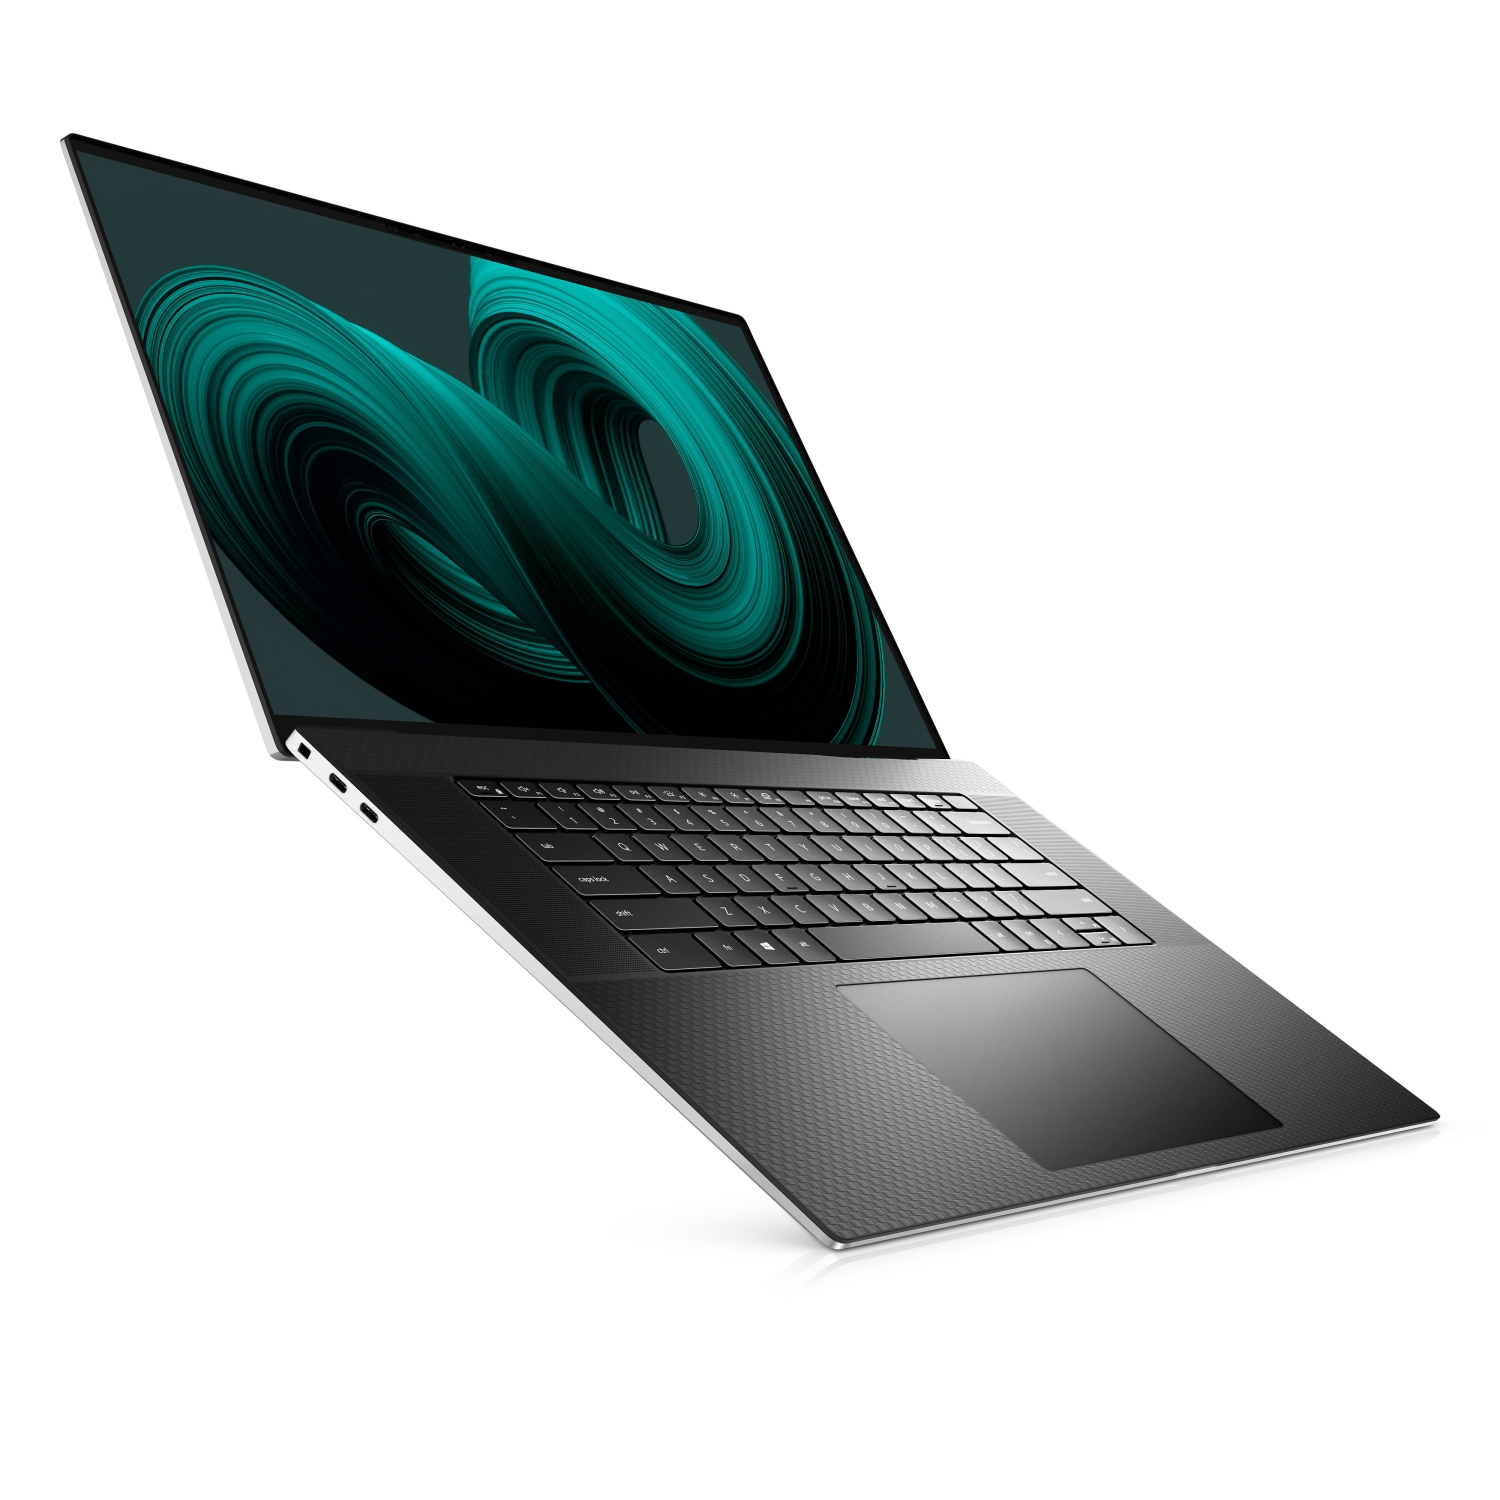 Refurbished (Excellent) - Dell XPS 17 9710 Laptop (2021) | 17" 4K Touch | Core i9 - 2TB SSD - 64GB RAM - RTX 3060 | 8 Cores @ 5 GHz - 11th Gen CPU Certified Refurbished